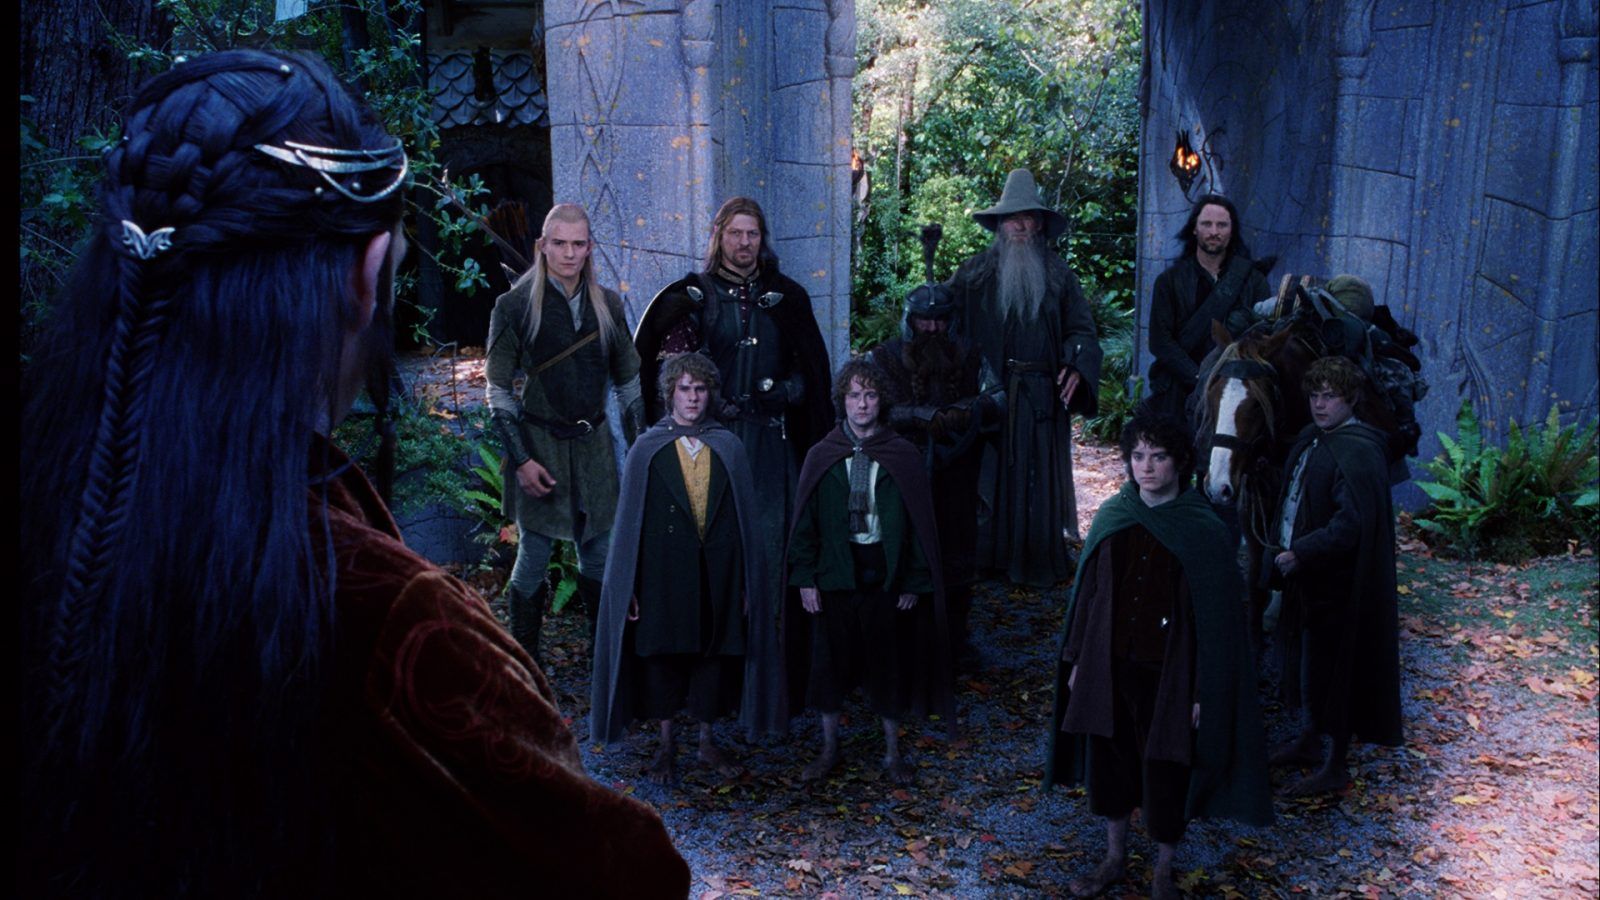 The Hobbit' As A Trilogy? Hollywood Has Jumped The Shark